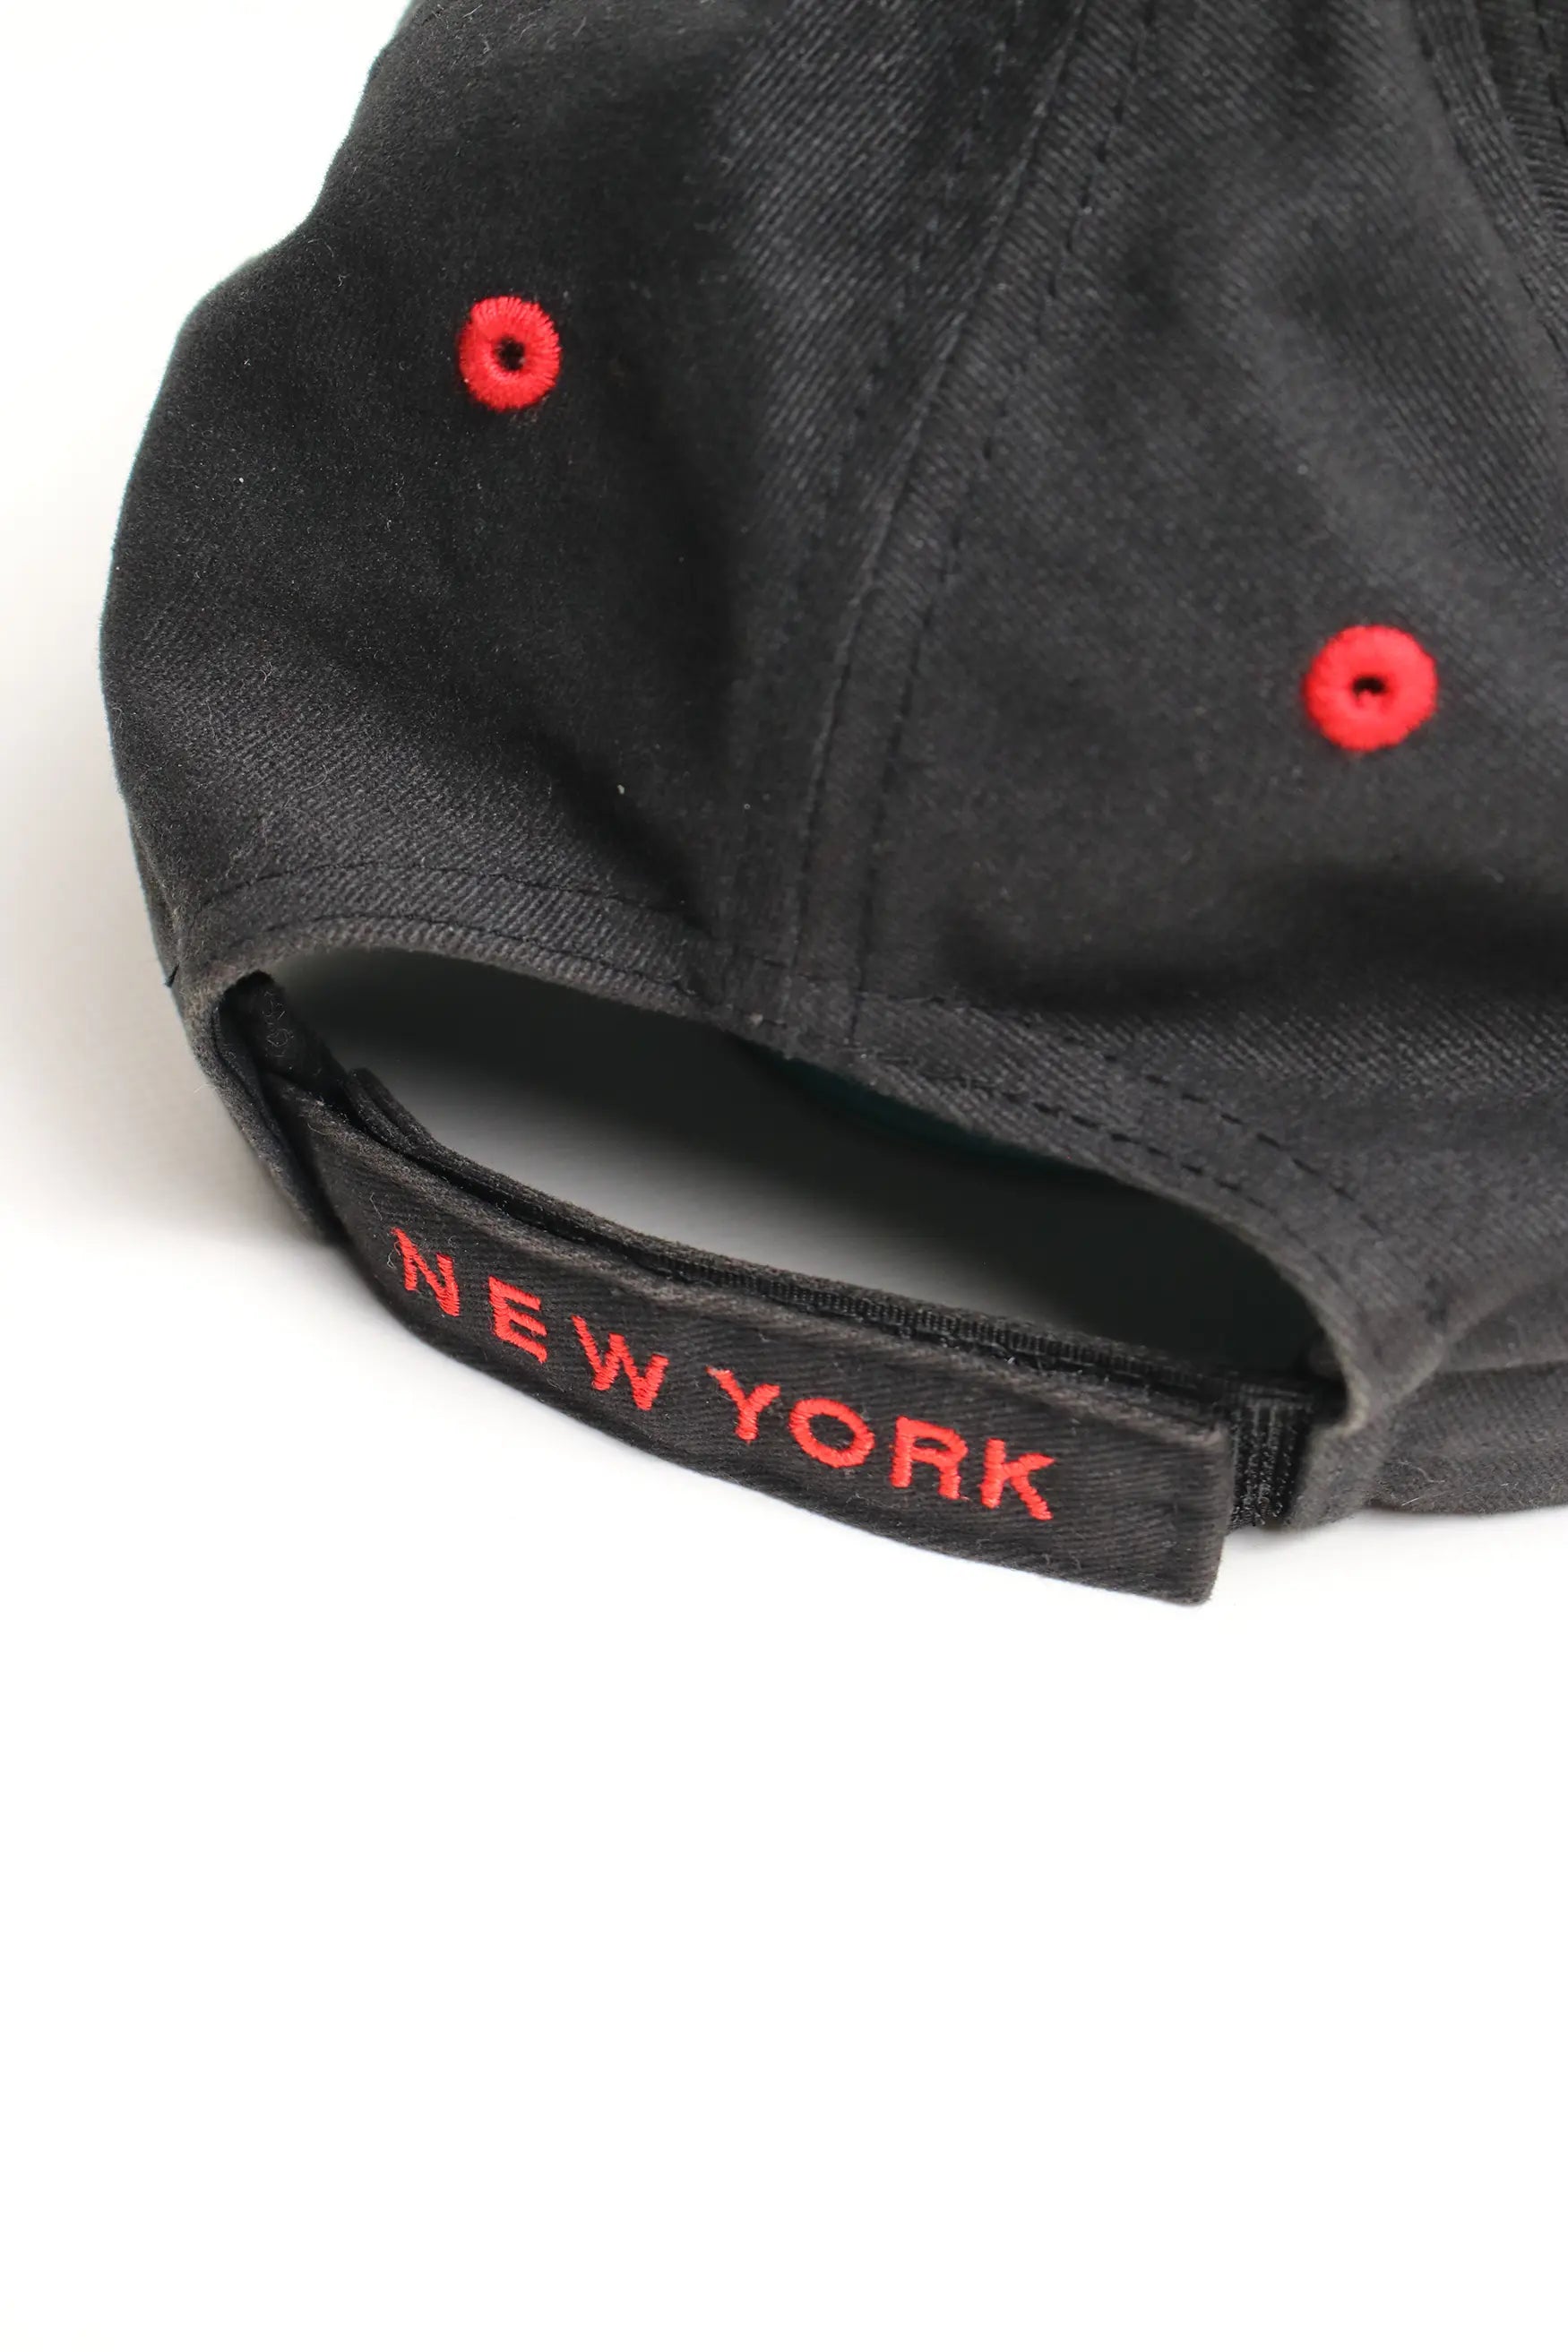 Russell NY Dragons Cap